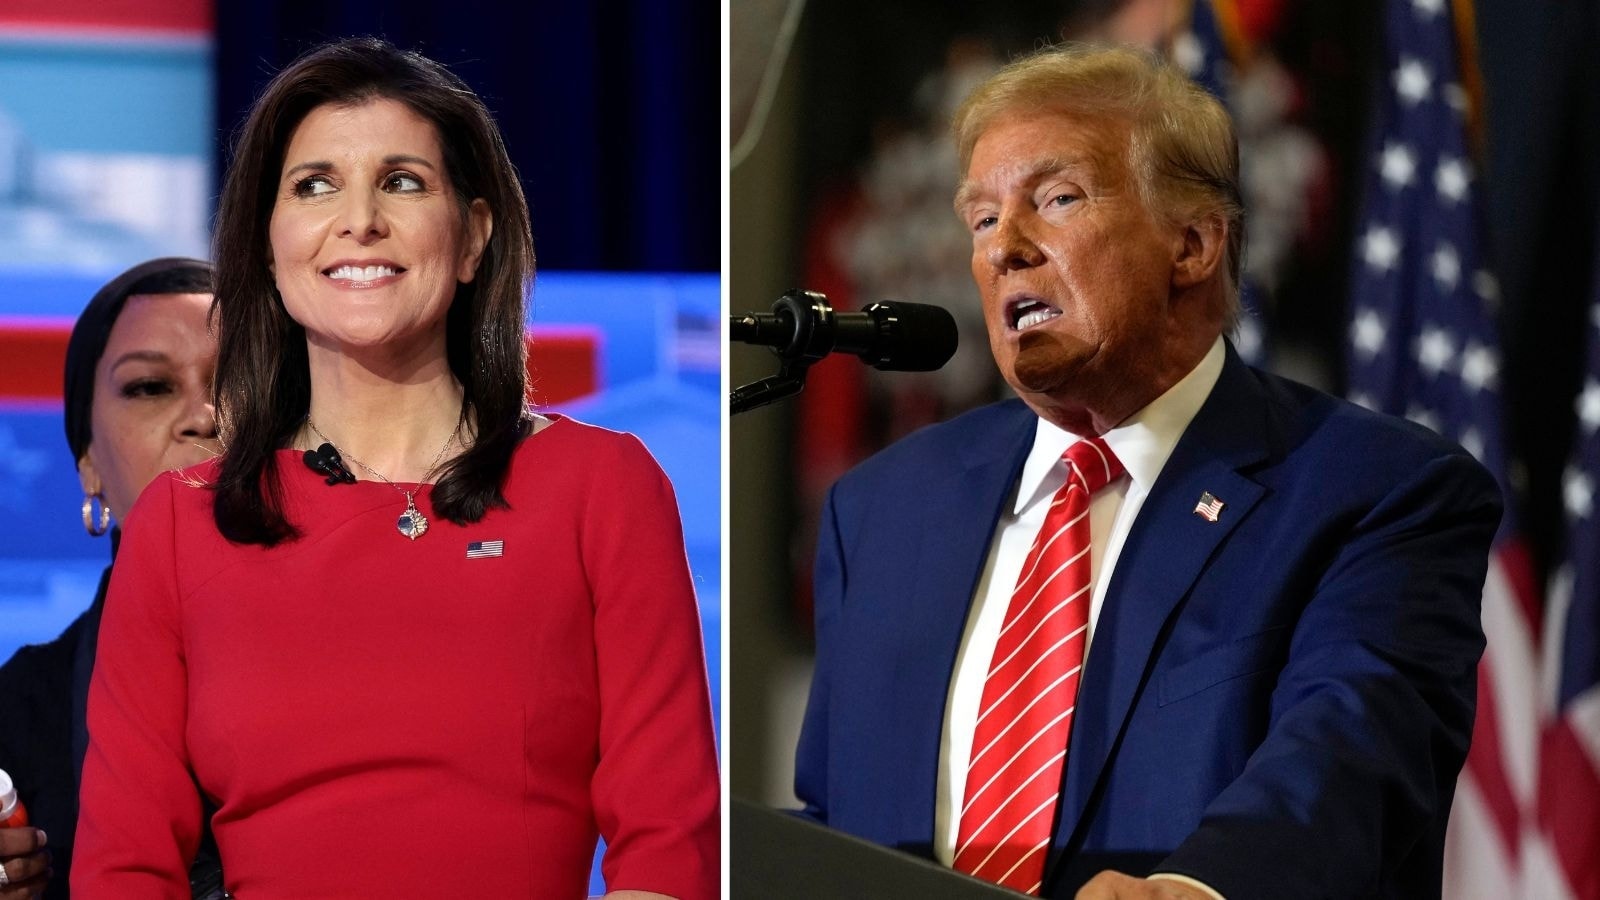 ‘You don’t deserve…': Nikki Haley rips Trump for mocking her husband's military services; Biden joins in